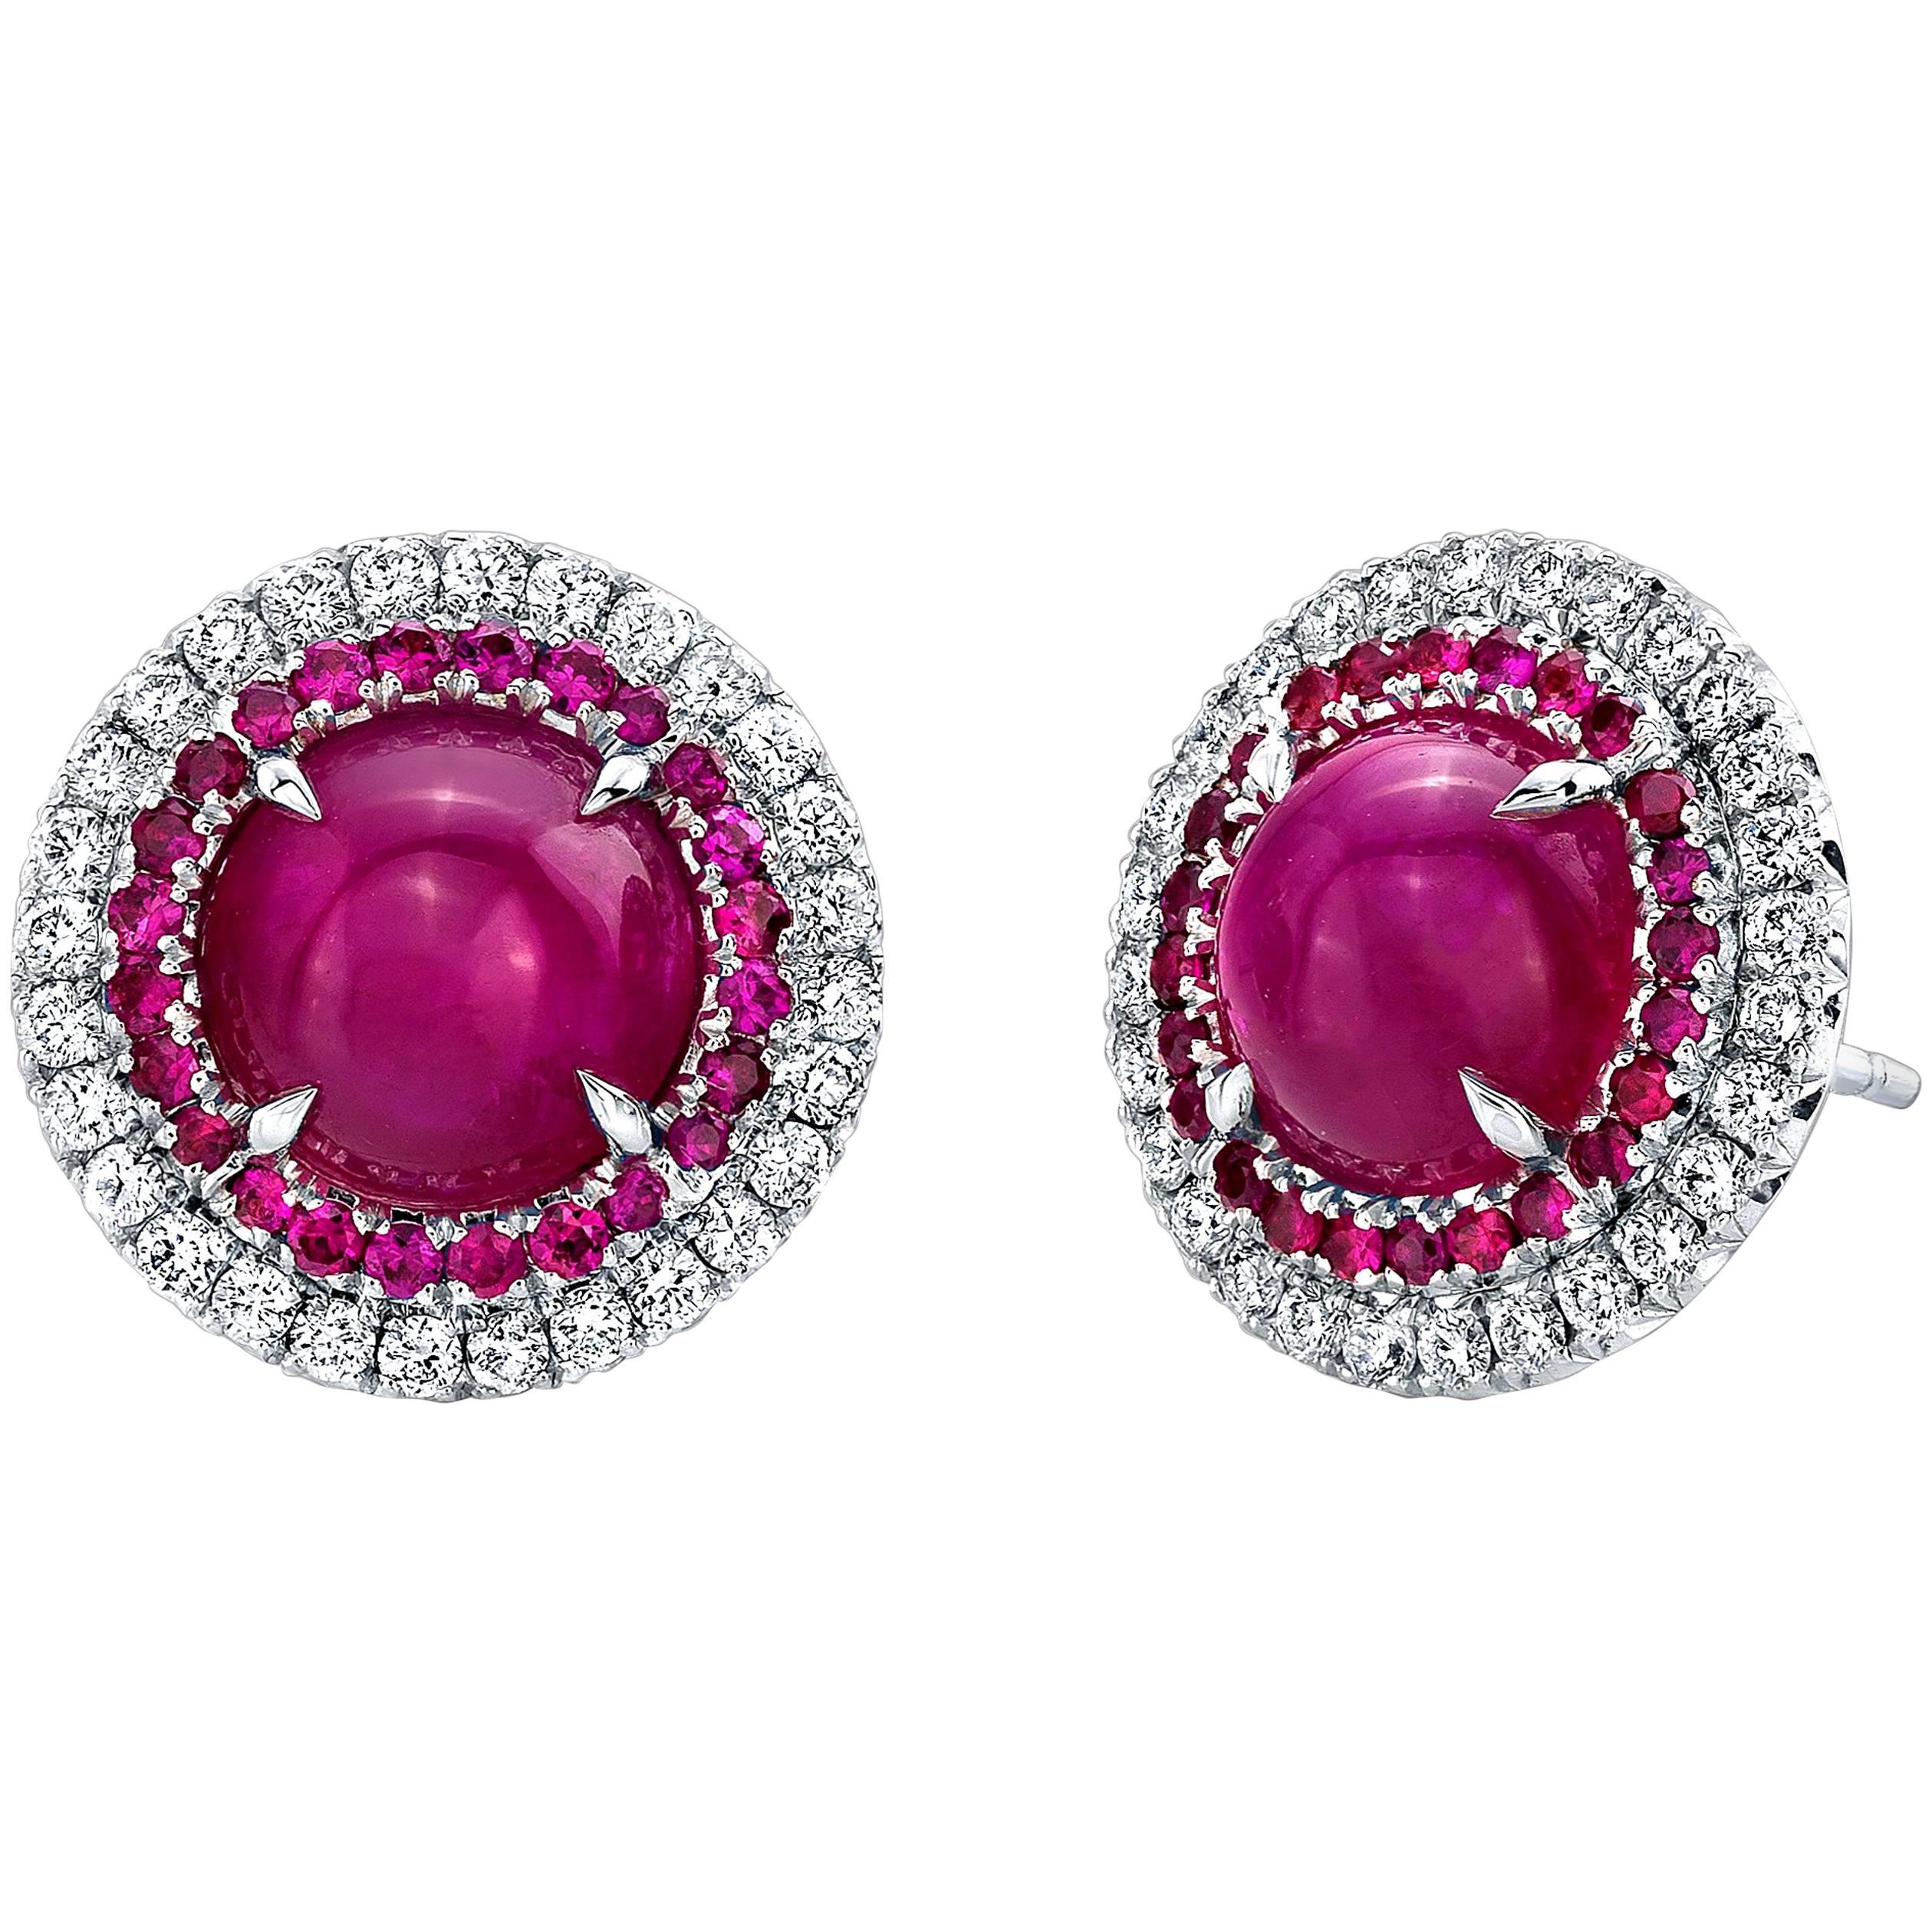 4.24 Carat TW Ruby Cabochon Double Halo Studs Earrings For Sale